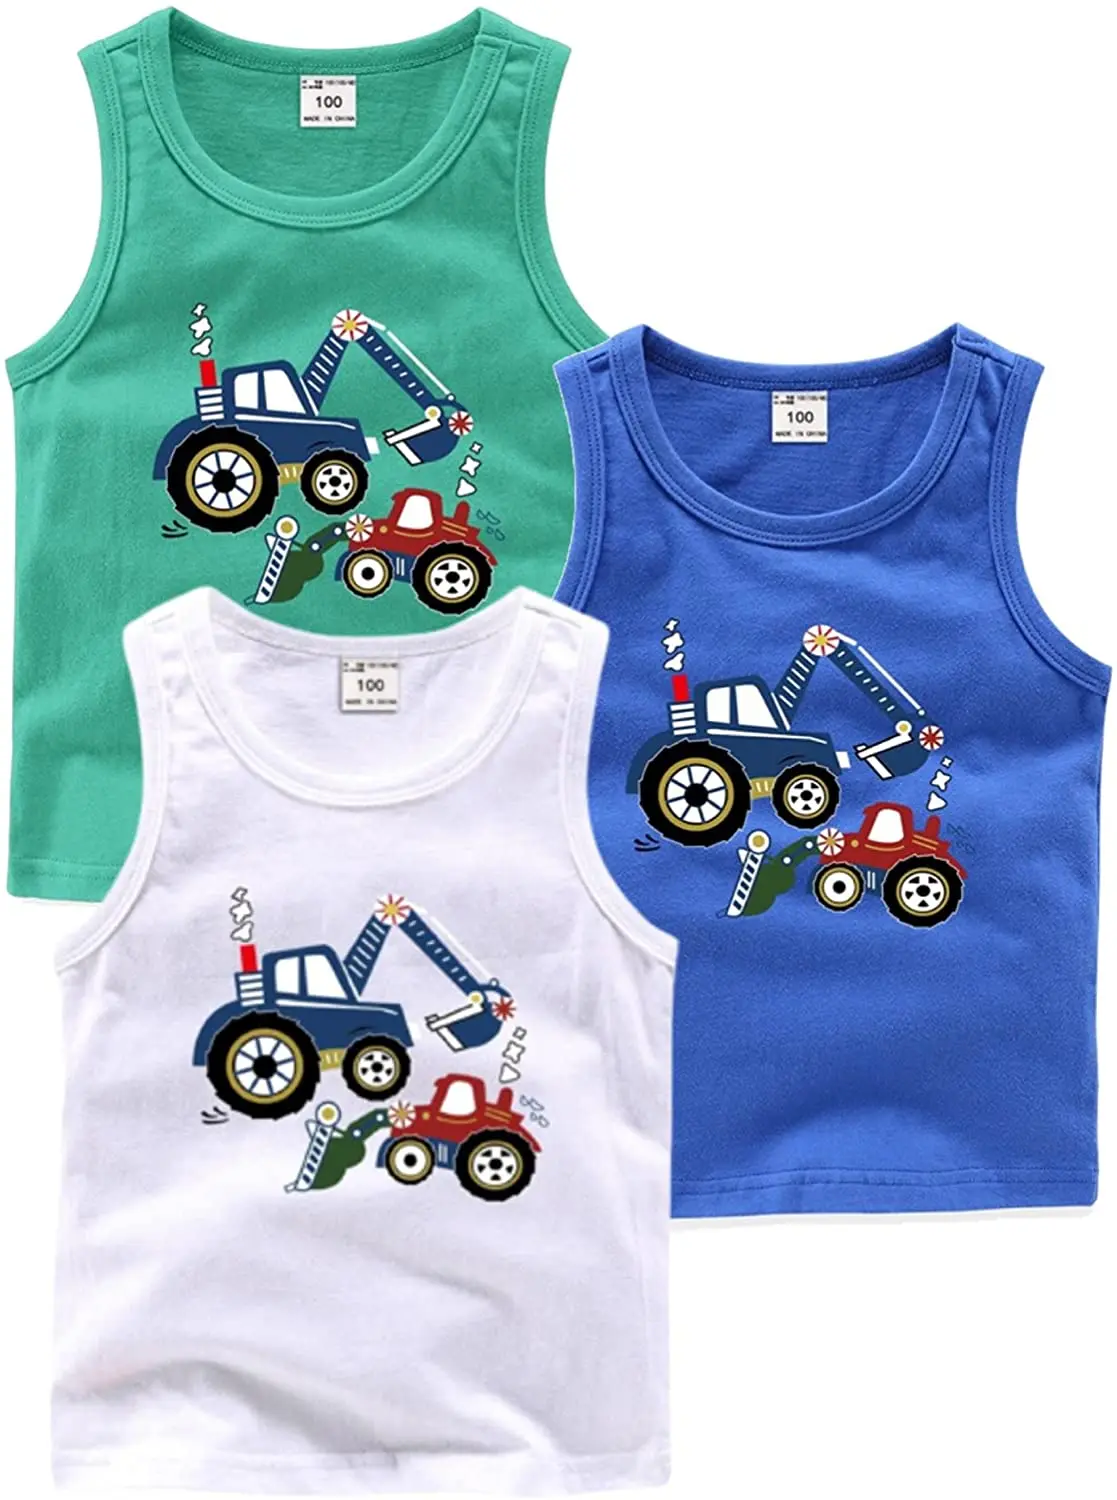 Tops Boys Girls Toddler Boys' 3-Pack Tank Tops Summer Graphic Crewneck Cotton Casual Tank Tops Boys Sleeveless Vest For 2-8 Years kid t shirt designs Tops & Tees